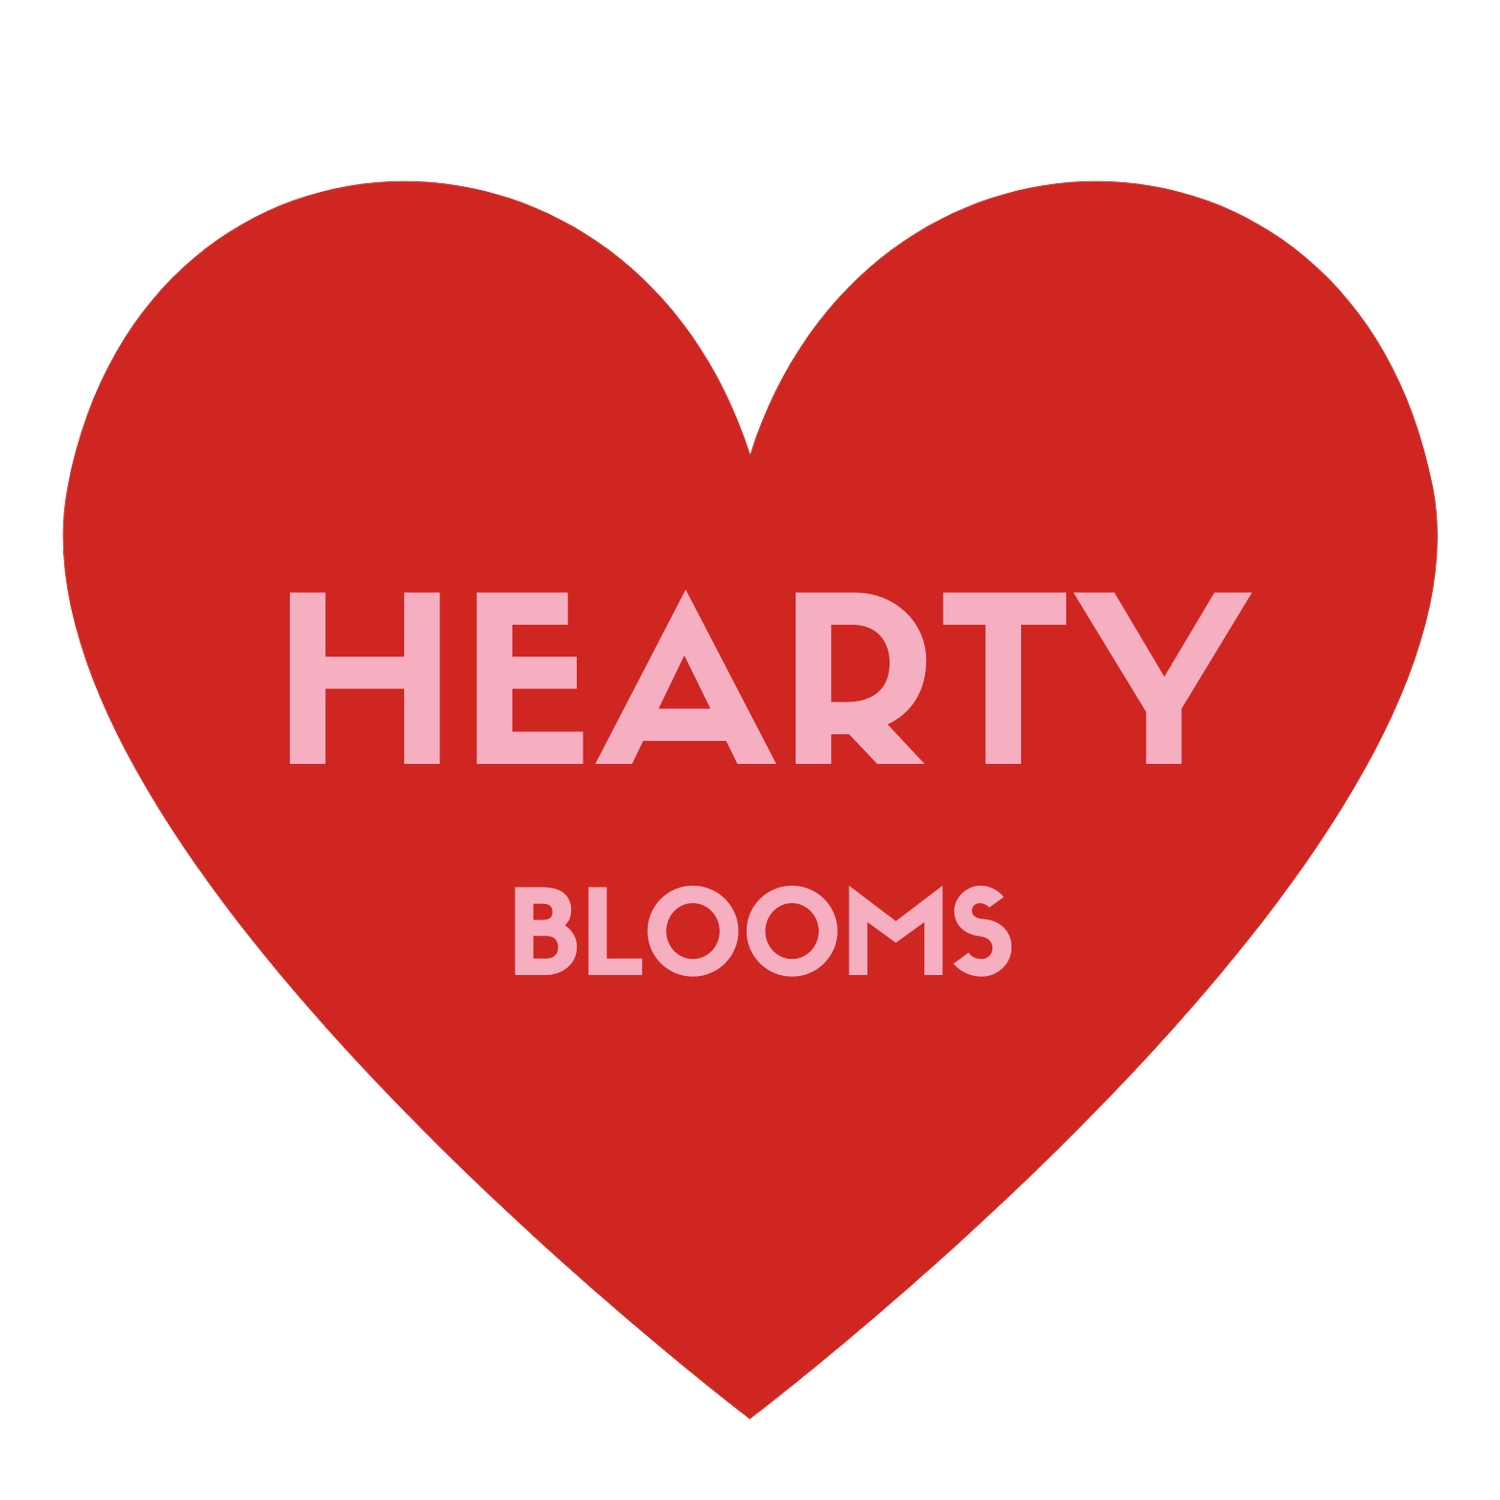 Hearty Blooms